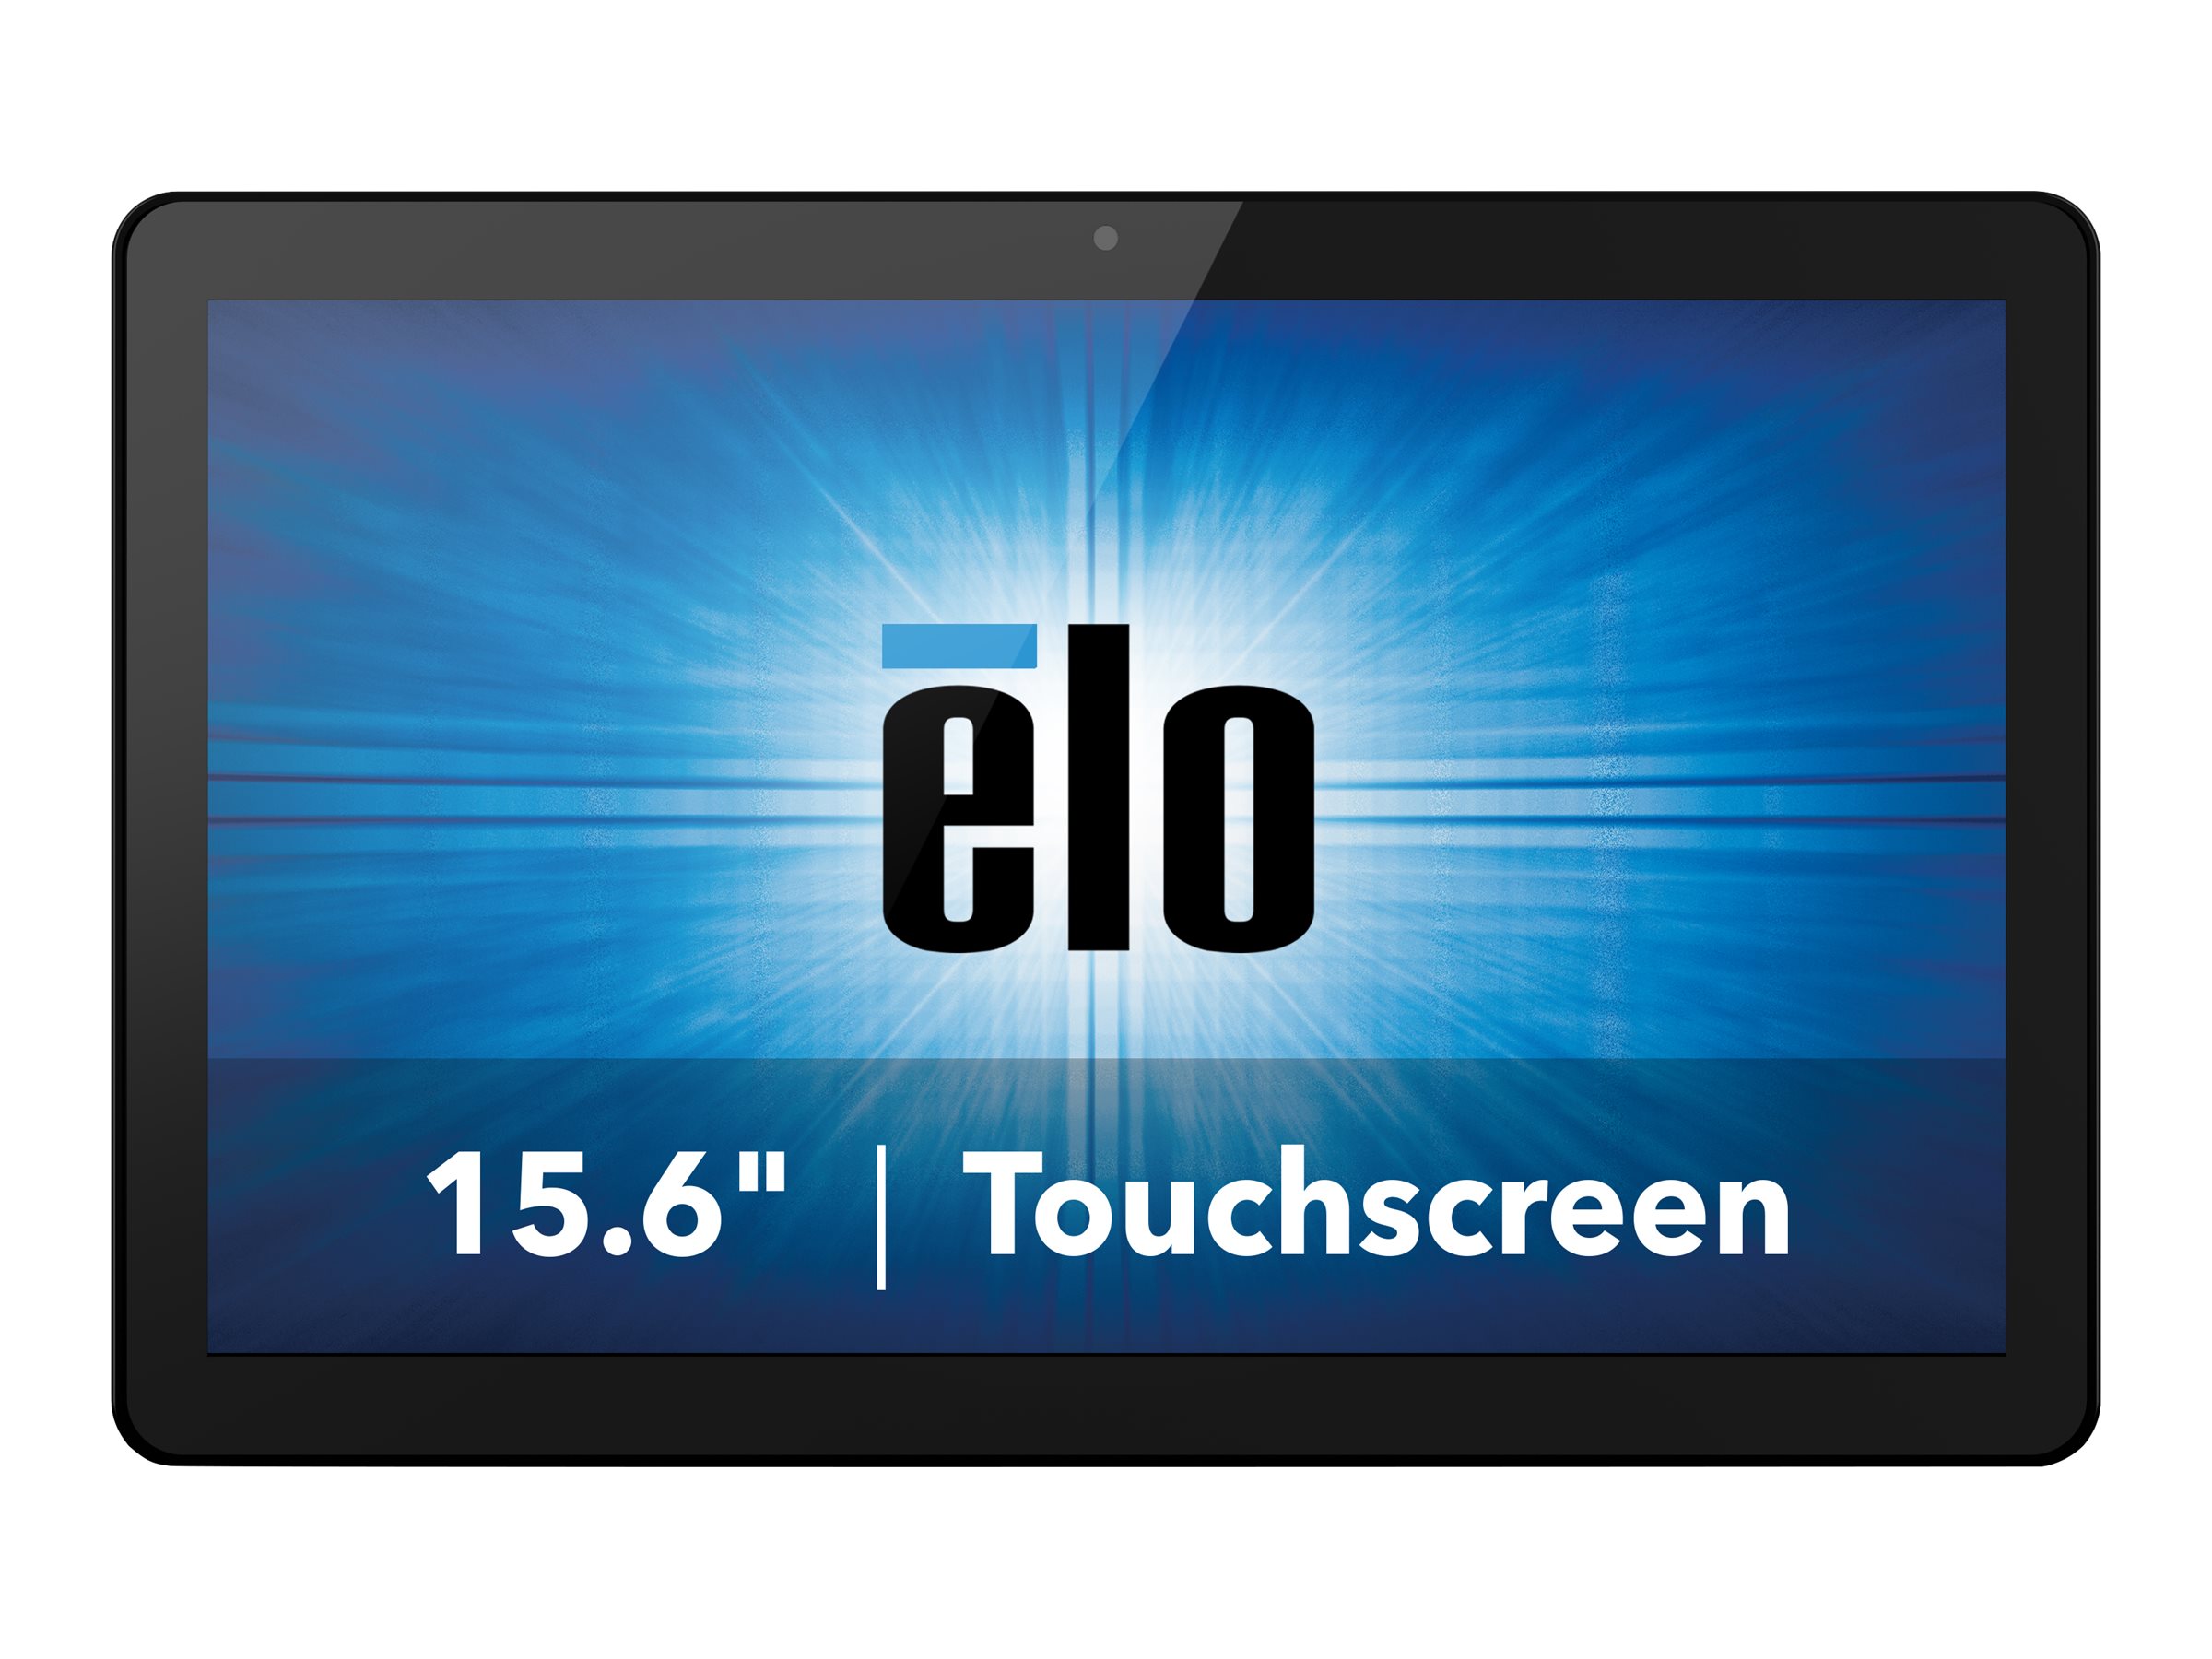 Elo Touch Solutions Elo I-Series 3.0 - All-in-One (Komplettlösung) - 1 x Snapdragon APQ8053 / 1.8 GHz - RAM 3 GB - SSD 32 GB - GigE - WLAN: 802.11a/b/g/n/ac, Bluetooth 4.1 - Android 8.1 (Oreo)